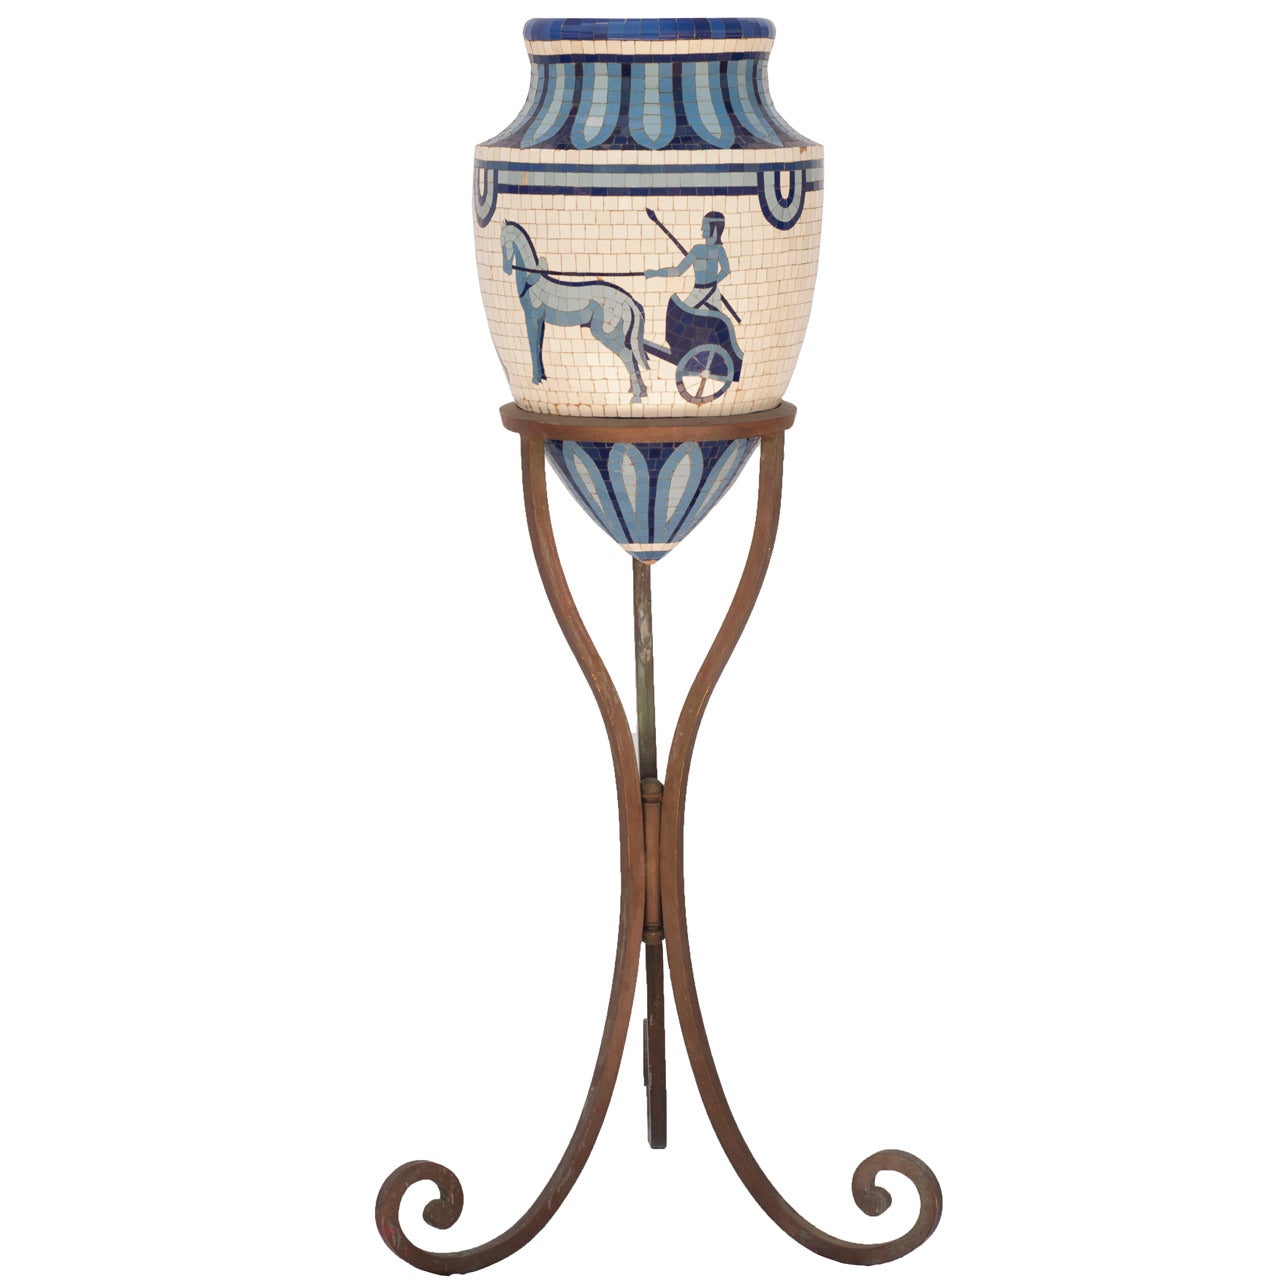 Blue and White Mosaic Urn on a Wrought Iron Stand